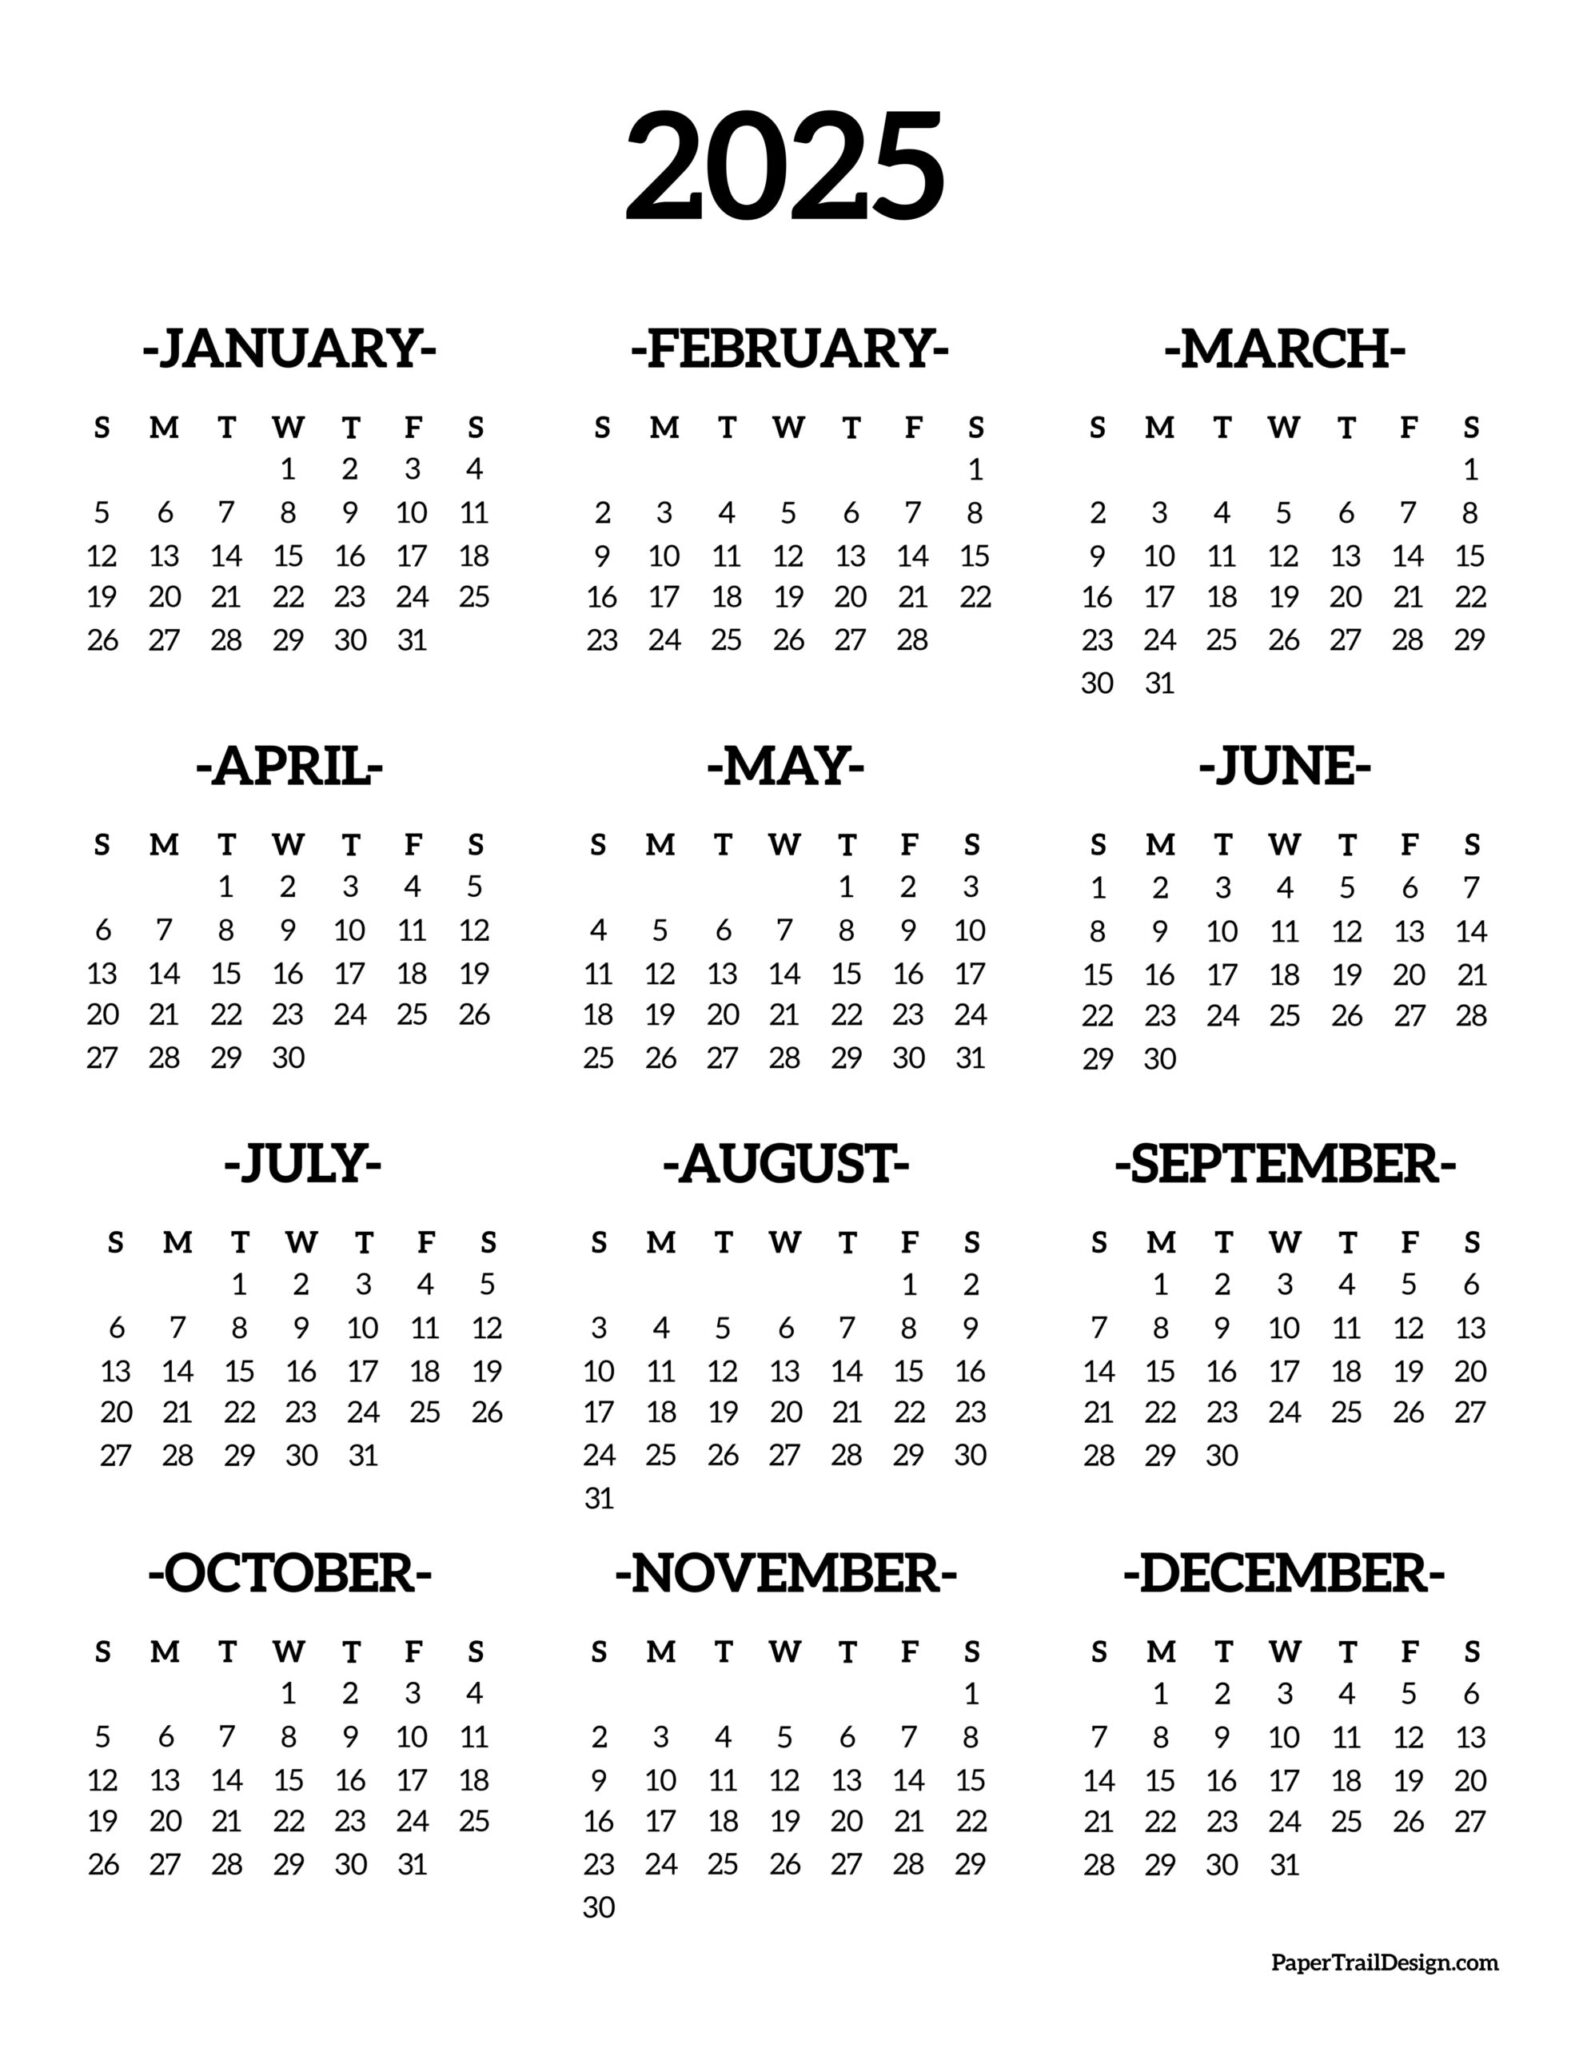 2025 Printable Calendar One Page - Paper Trail Design